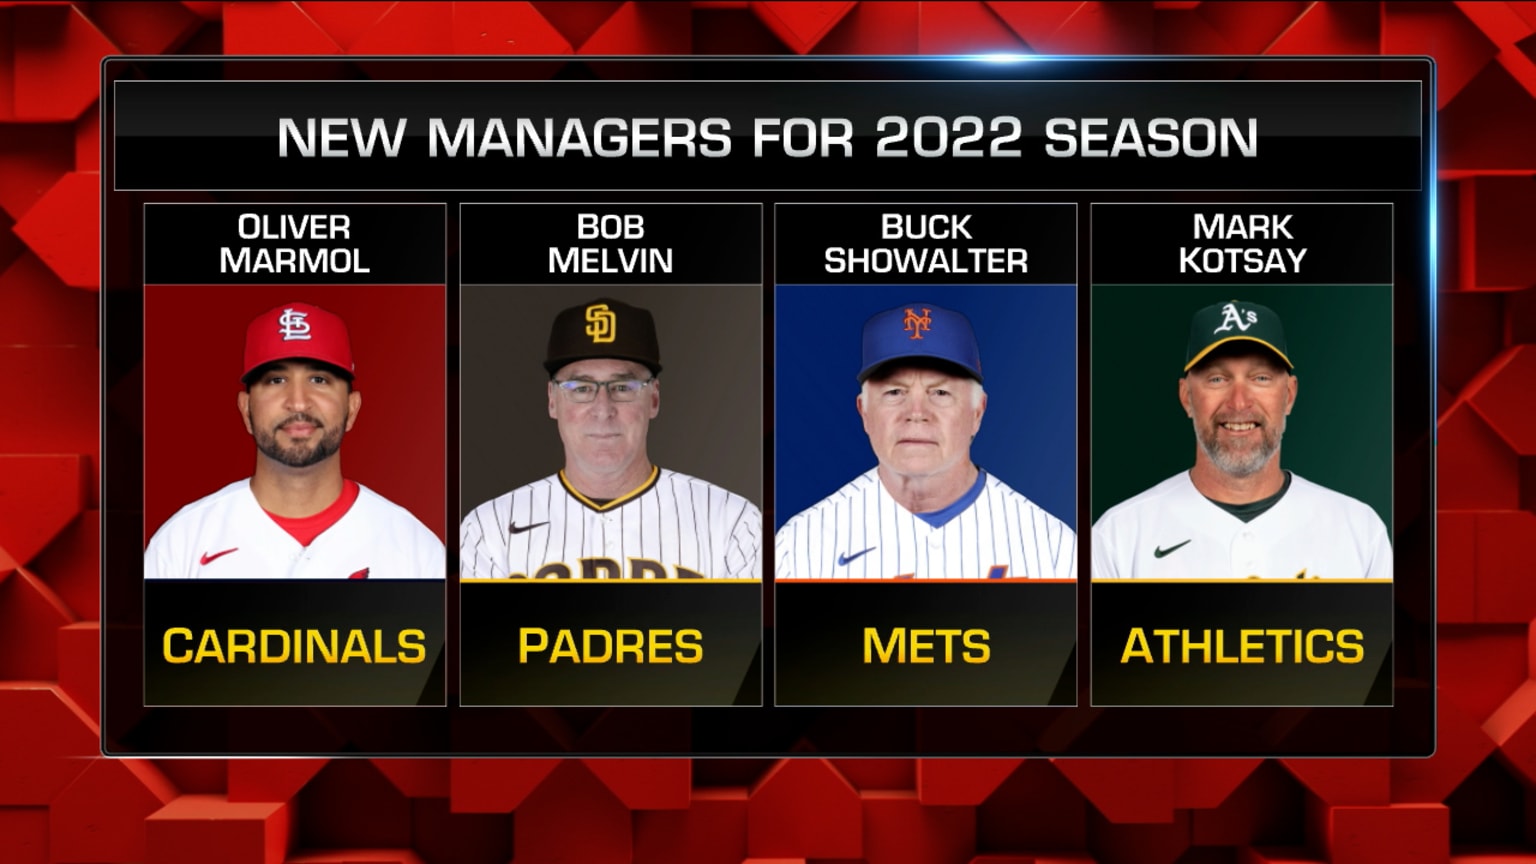 New managers in 2022, 02/19/2022